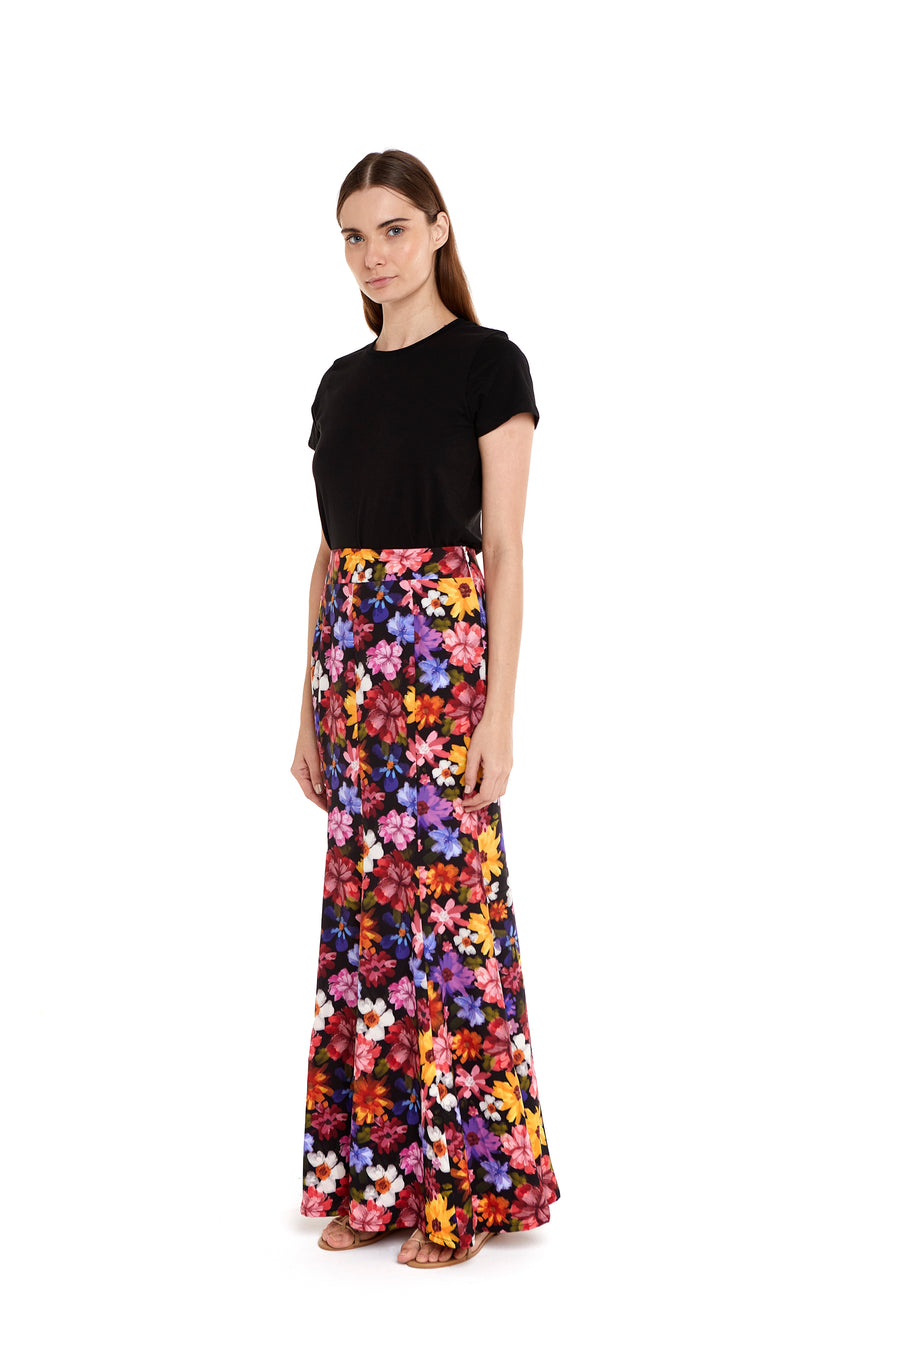 Camille Giverny Noche Skirt